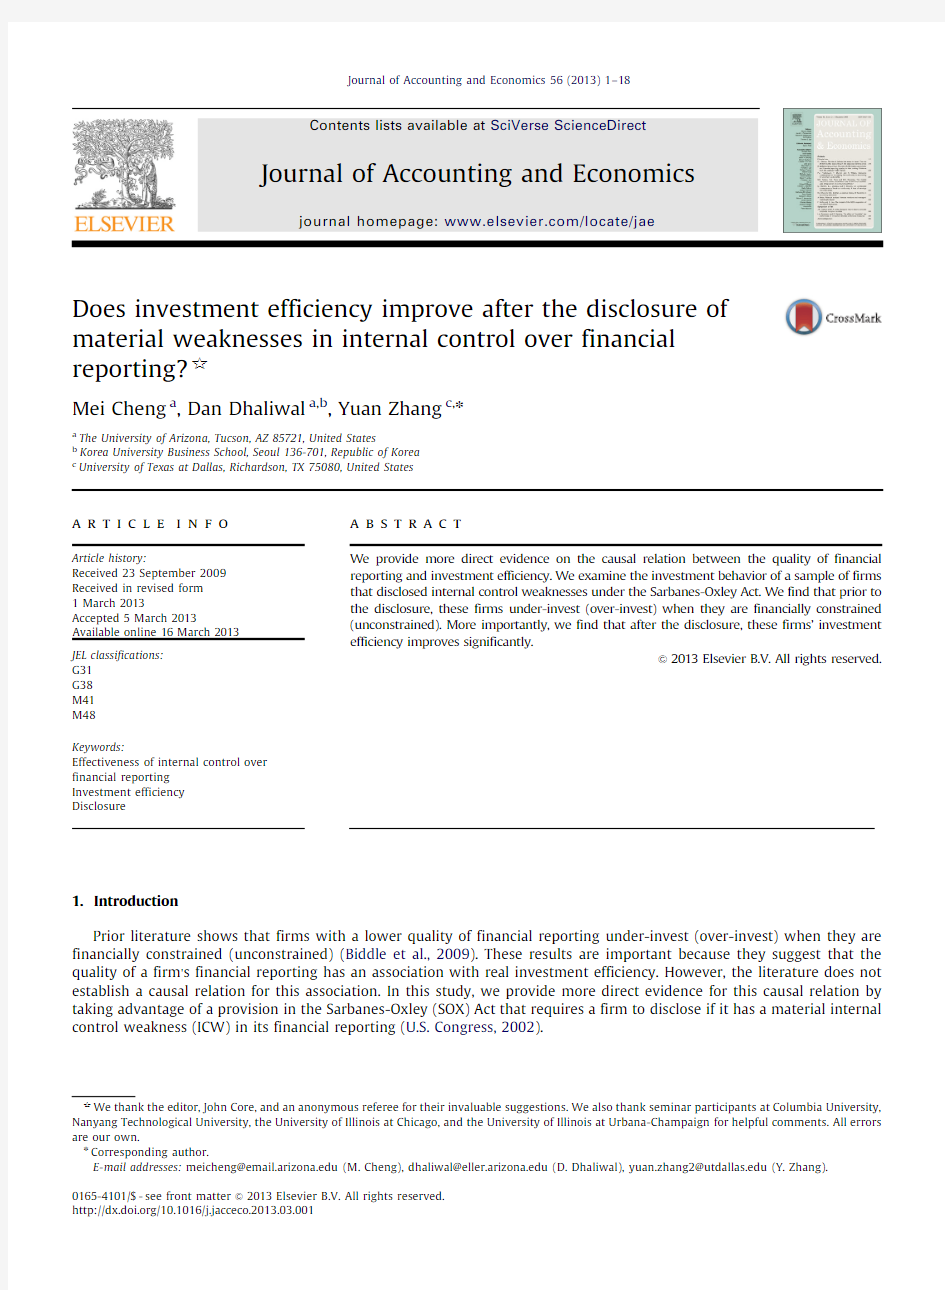 Does_investment_efficiency_improve_after_the_disclosure_of_material_weaknesses_in_internal_control